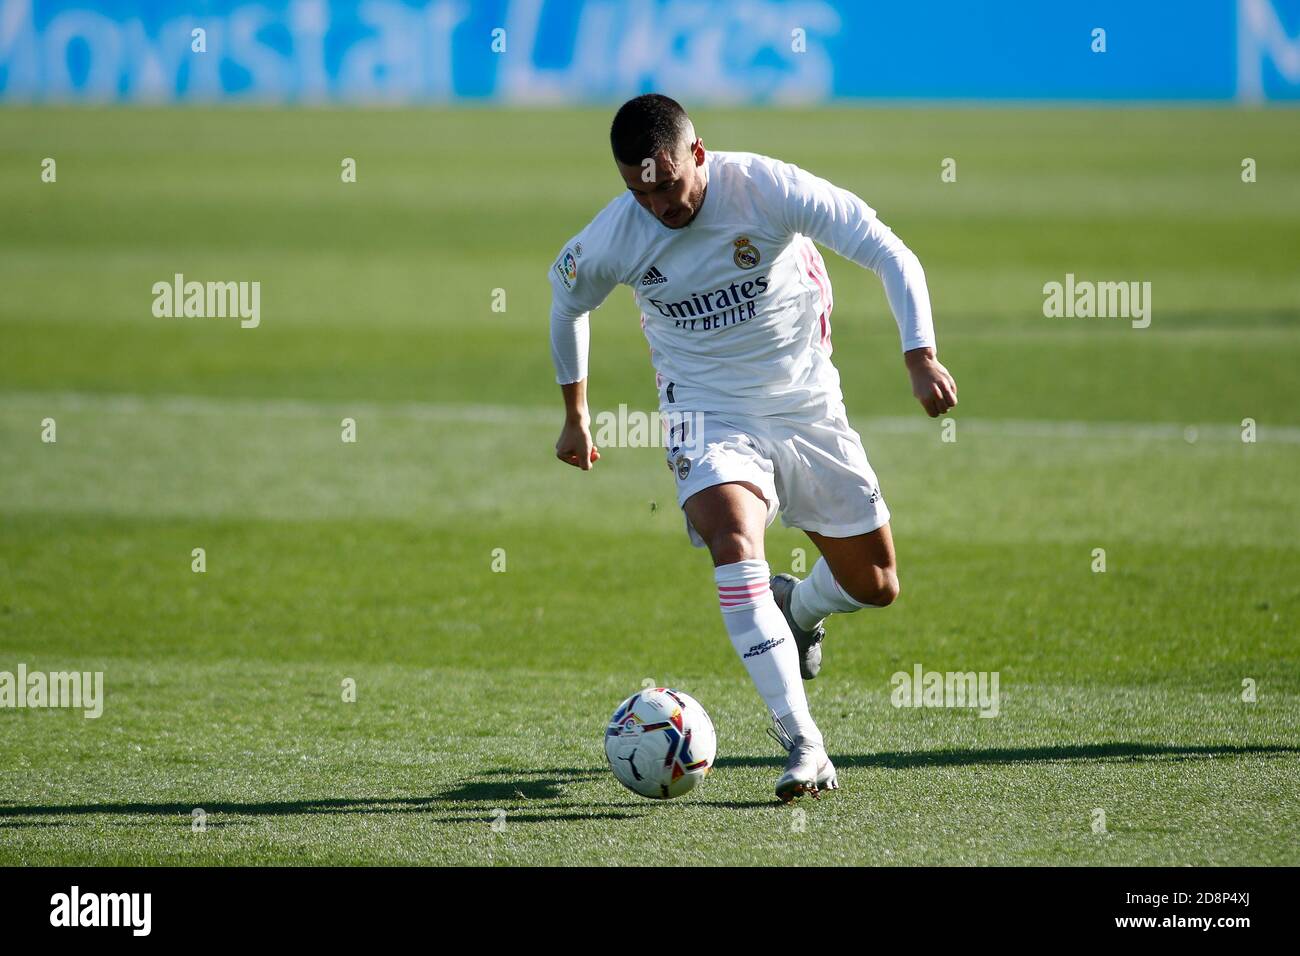 Madrid, Spain. 31st October, 2020. Eden Hazard of Real Madrid in action during the Spanish championship La Liga football match between Real Madrid and SD Huesca on October 31, 2020 at Alfredo Di Stefano stadium in Valdebebas, Madrid, Spain - Photo Oscar J Barroso / Spain DPPI / DPPI Credit: LM/DPPI/Oscar Barroso/Alamy Live News Stock Photo